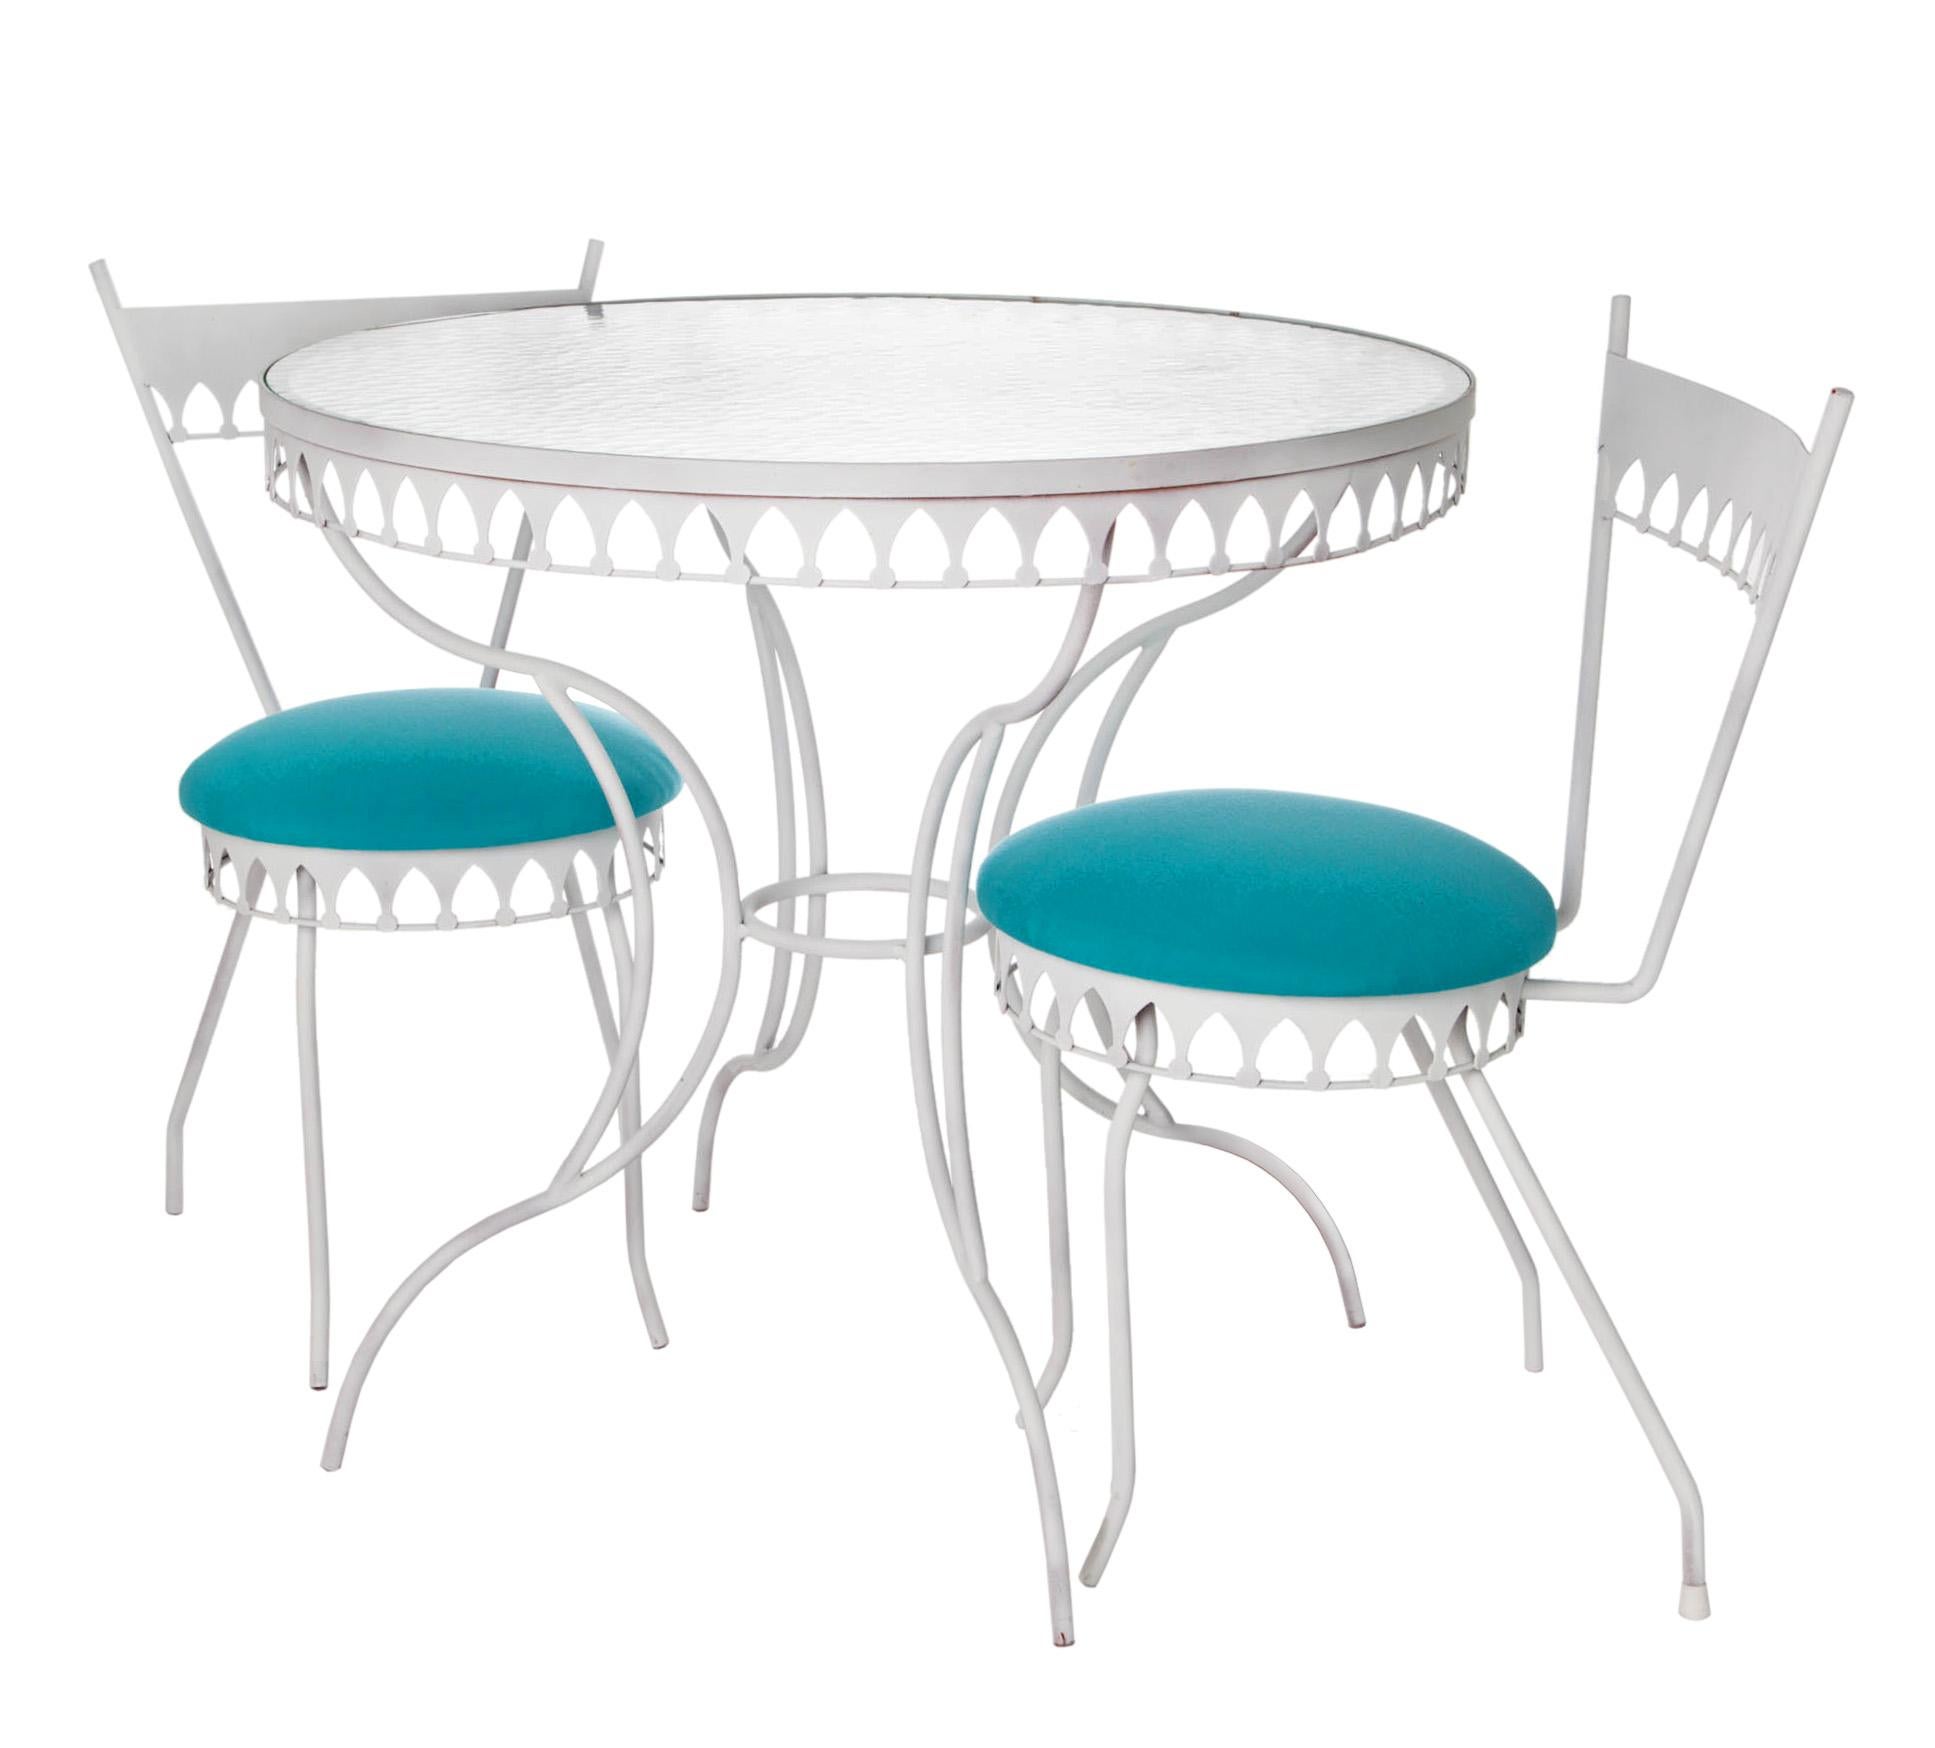 Iconic mid-century Moorish style café table with two small chairs, upholstered in aqua Sunbrella.
Perfect set for a balcony or other tight space. The two petite chairs have a  round back that hugs the back.
The seats are new inside & out. 
The round